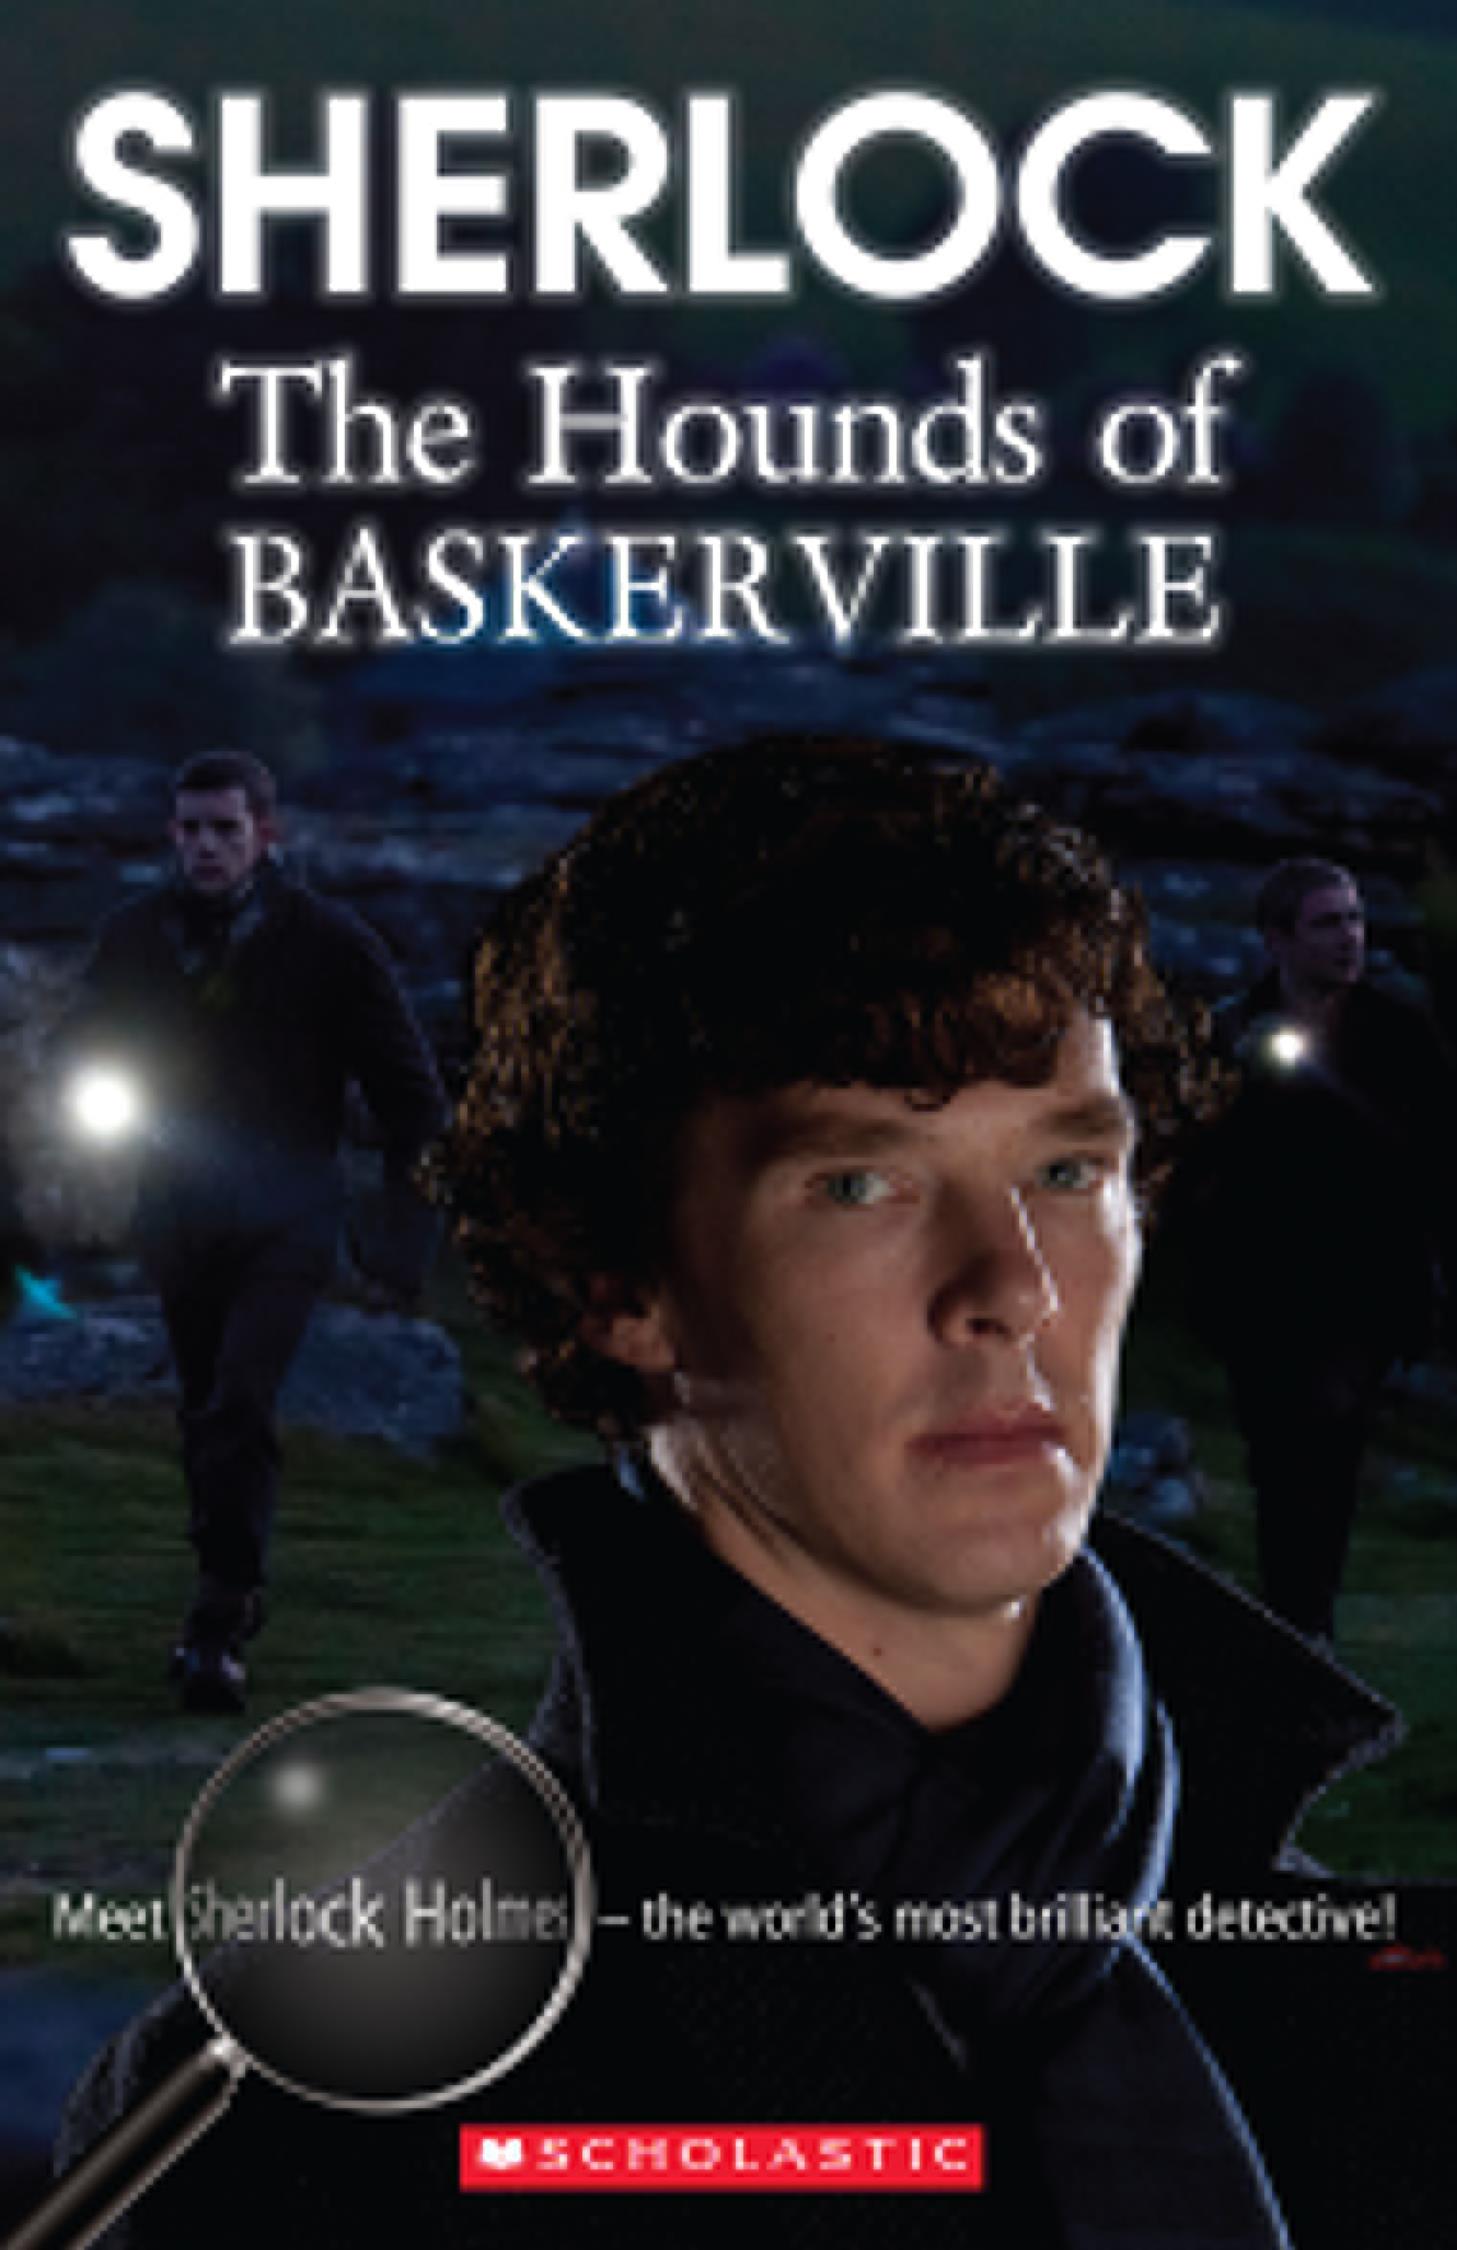 MGM: Readers: Sherlock: The Hounds of Baskerville (+ CD) - B1